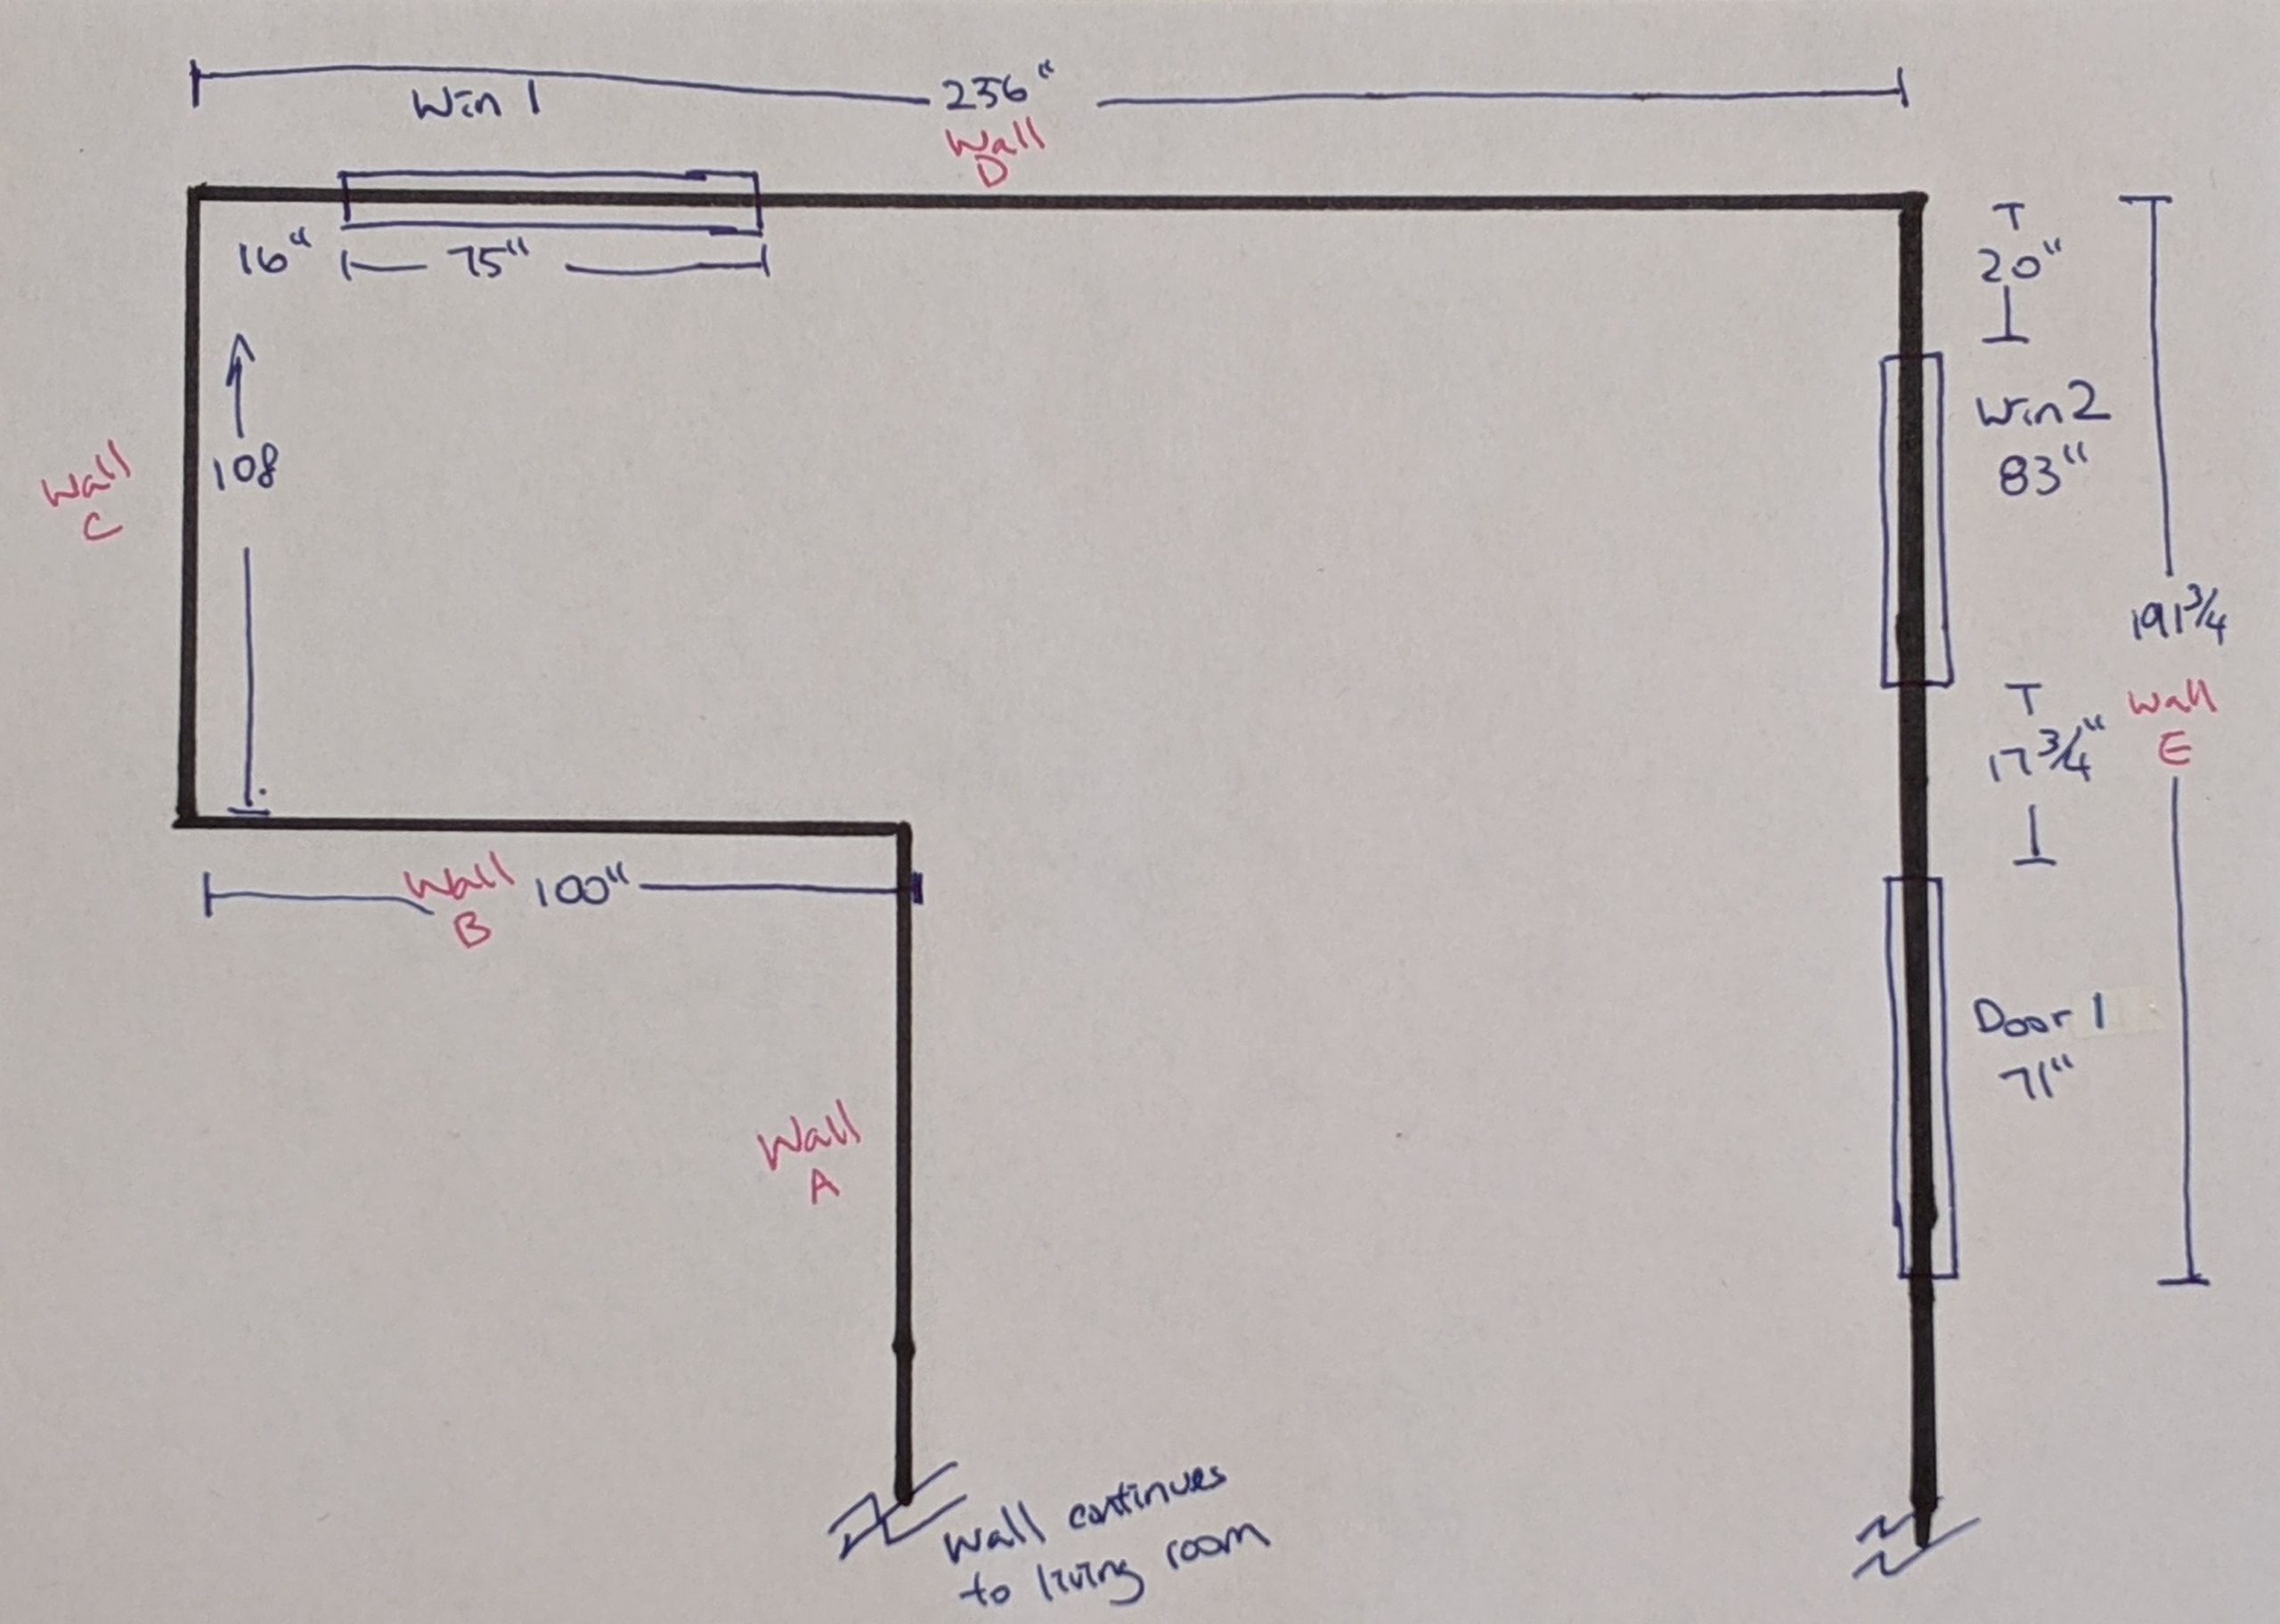 A sketch of a room with measurements for windows and door openings